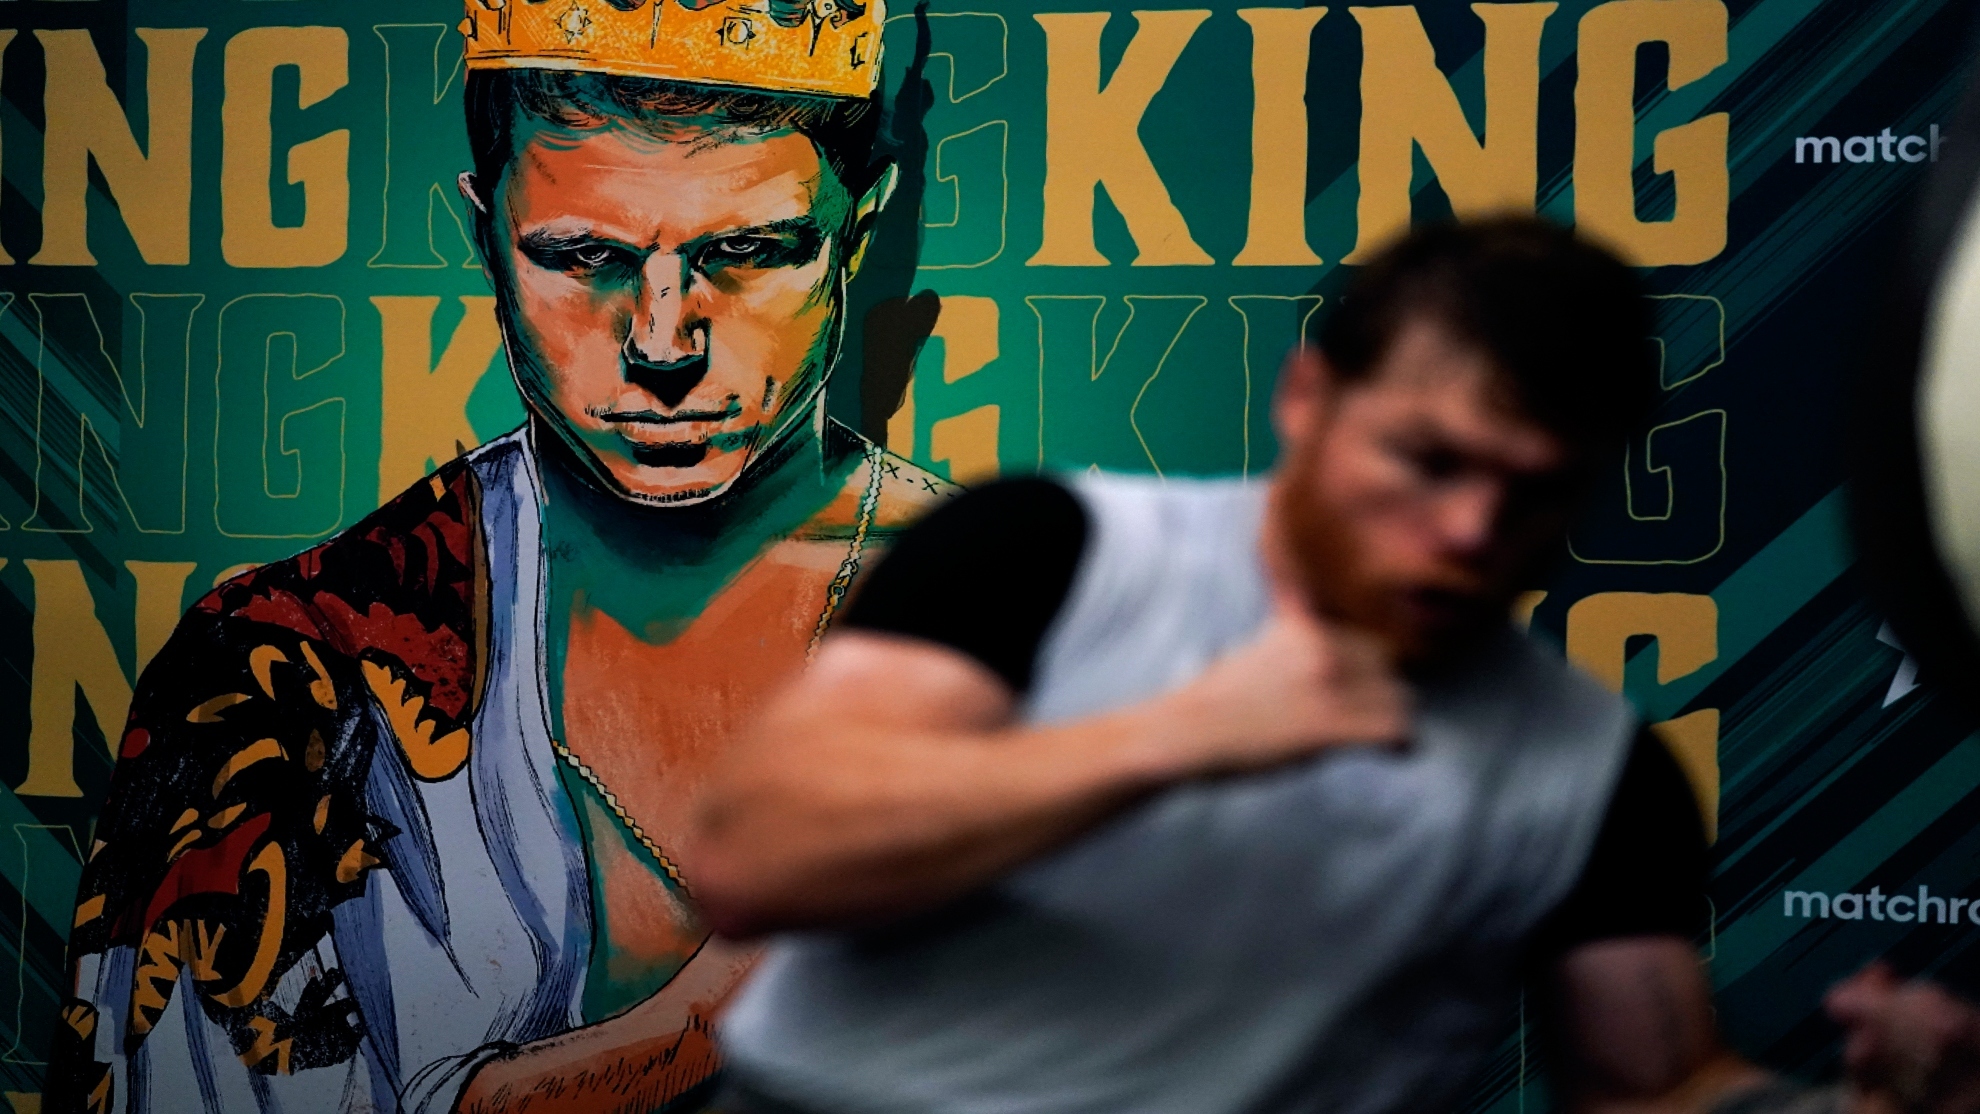 'Canelo' is the current WBA, WBC and WBO super middleweight champion.